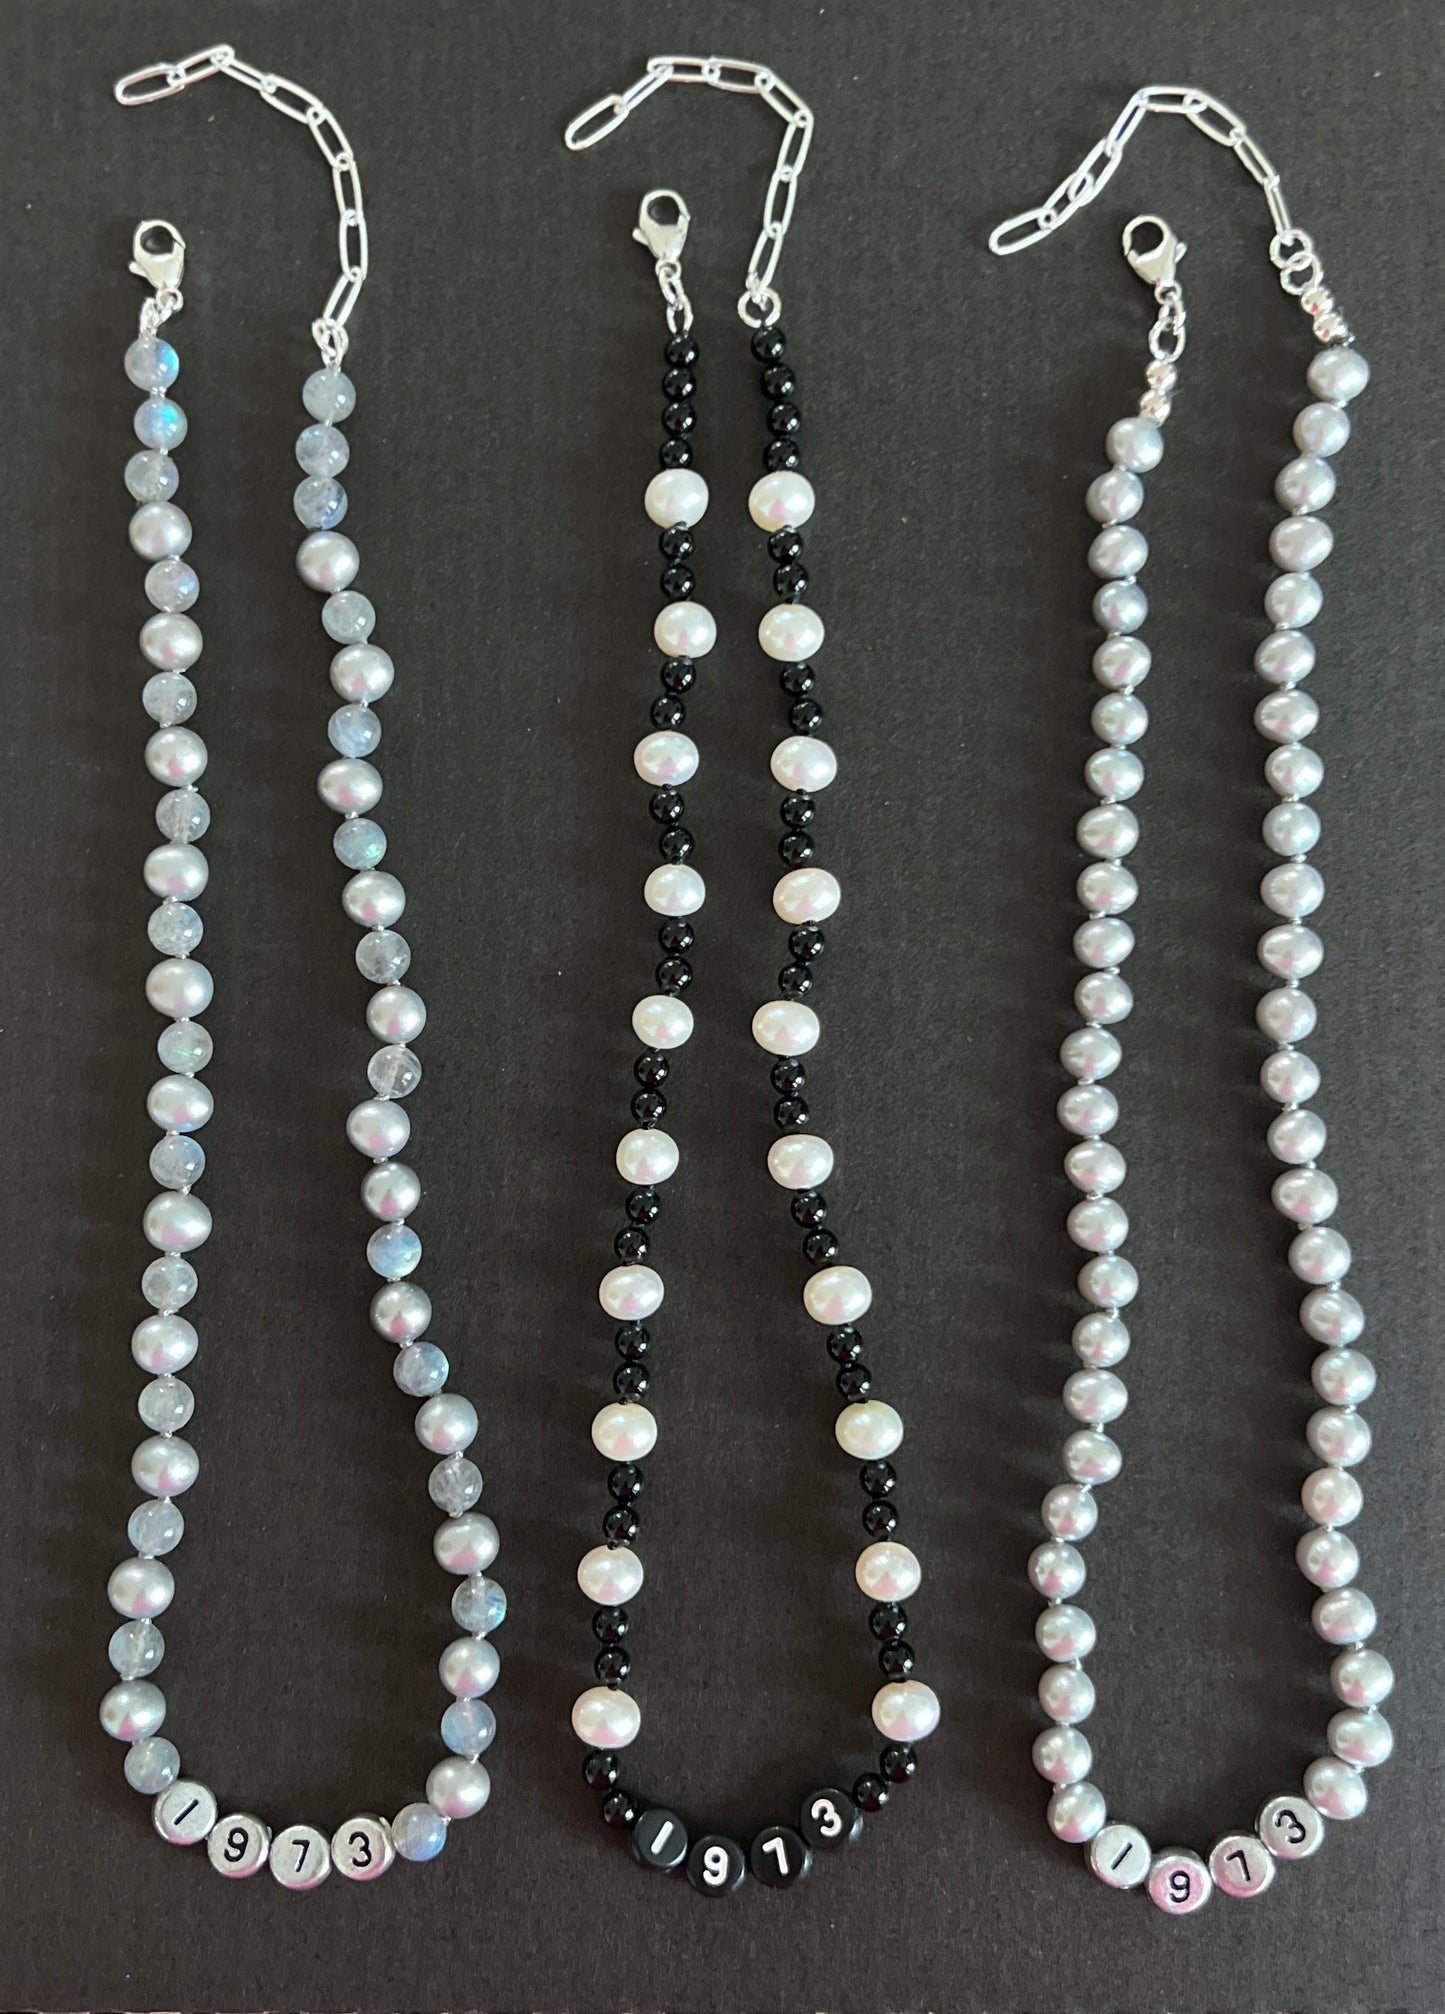 1973 Gemstone // Pearl Candy Necklaces